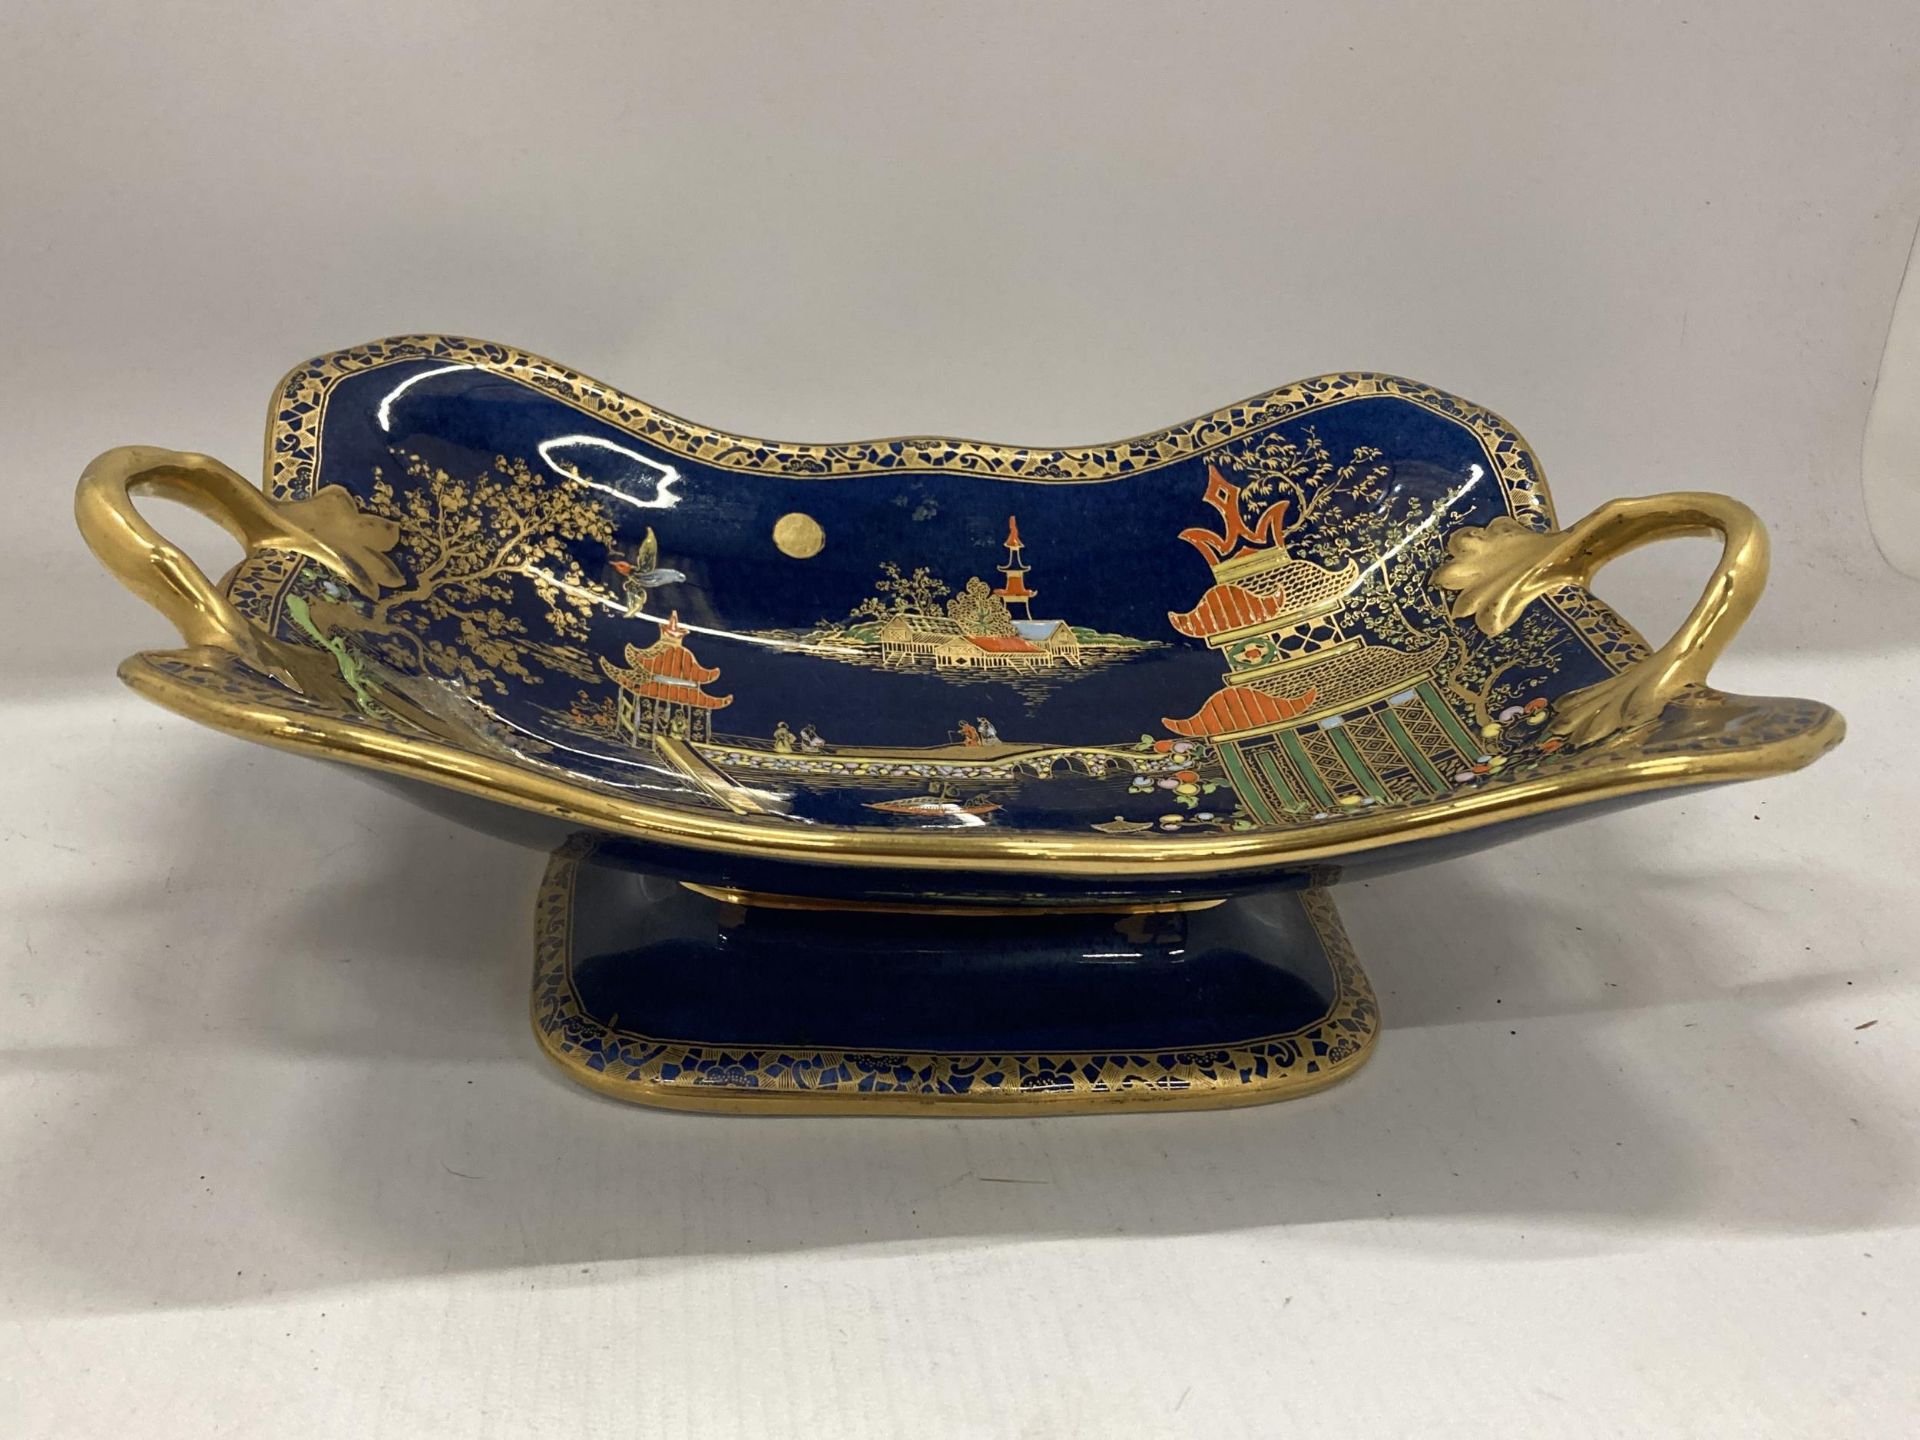 A CARLTON WARE TWIN HANDLED PEDESTAL BOWL DECORATED IN THE 'MIKADO' PATTERN WITH GILT DESIGN ON A - Image 2 of 4